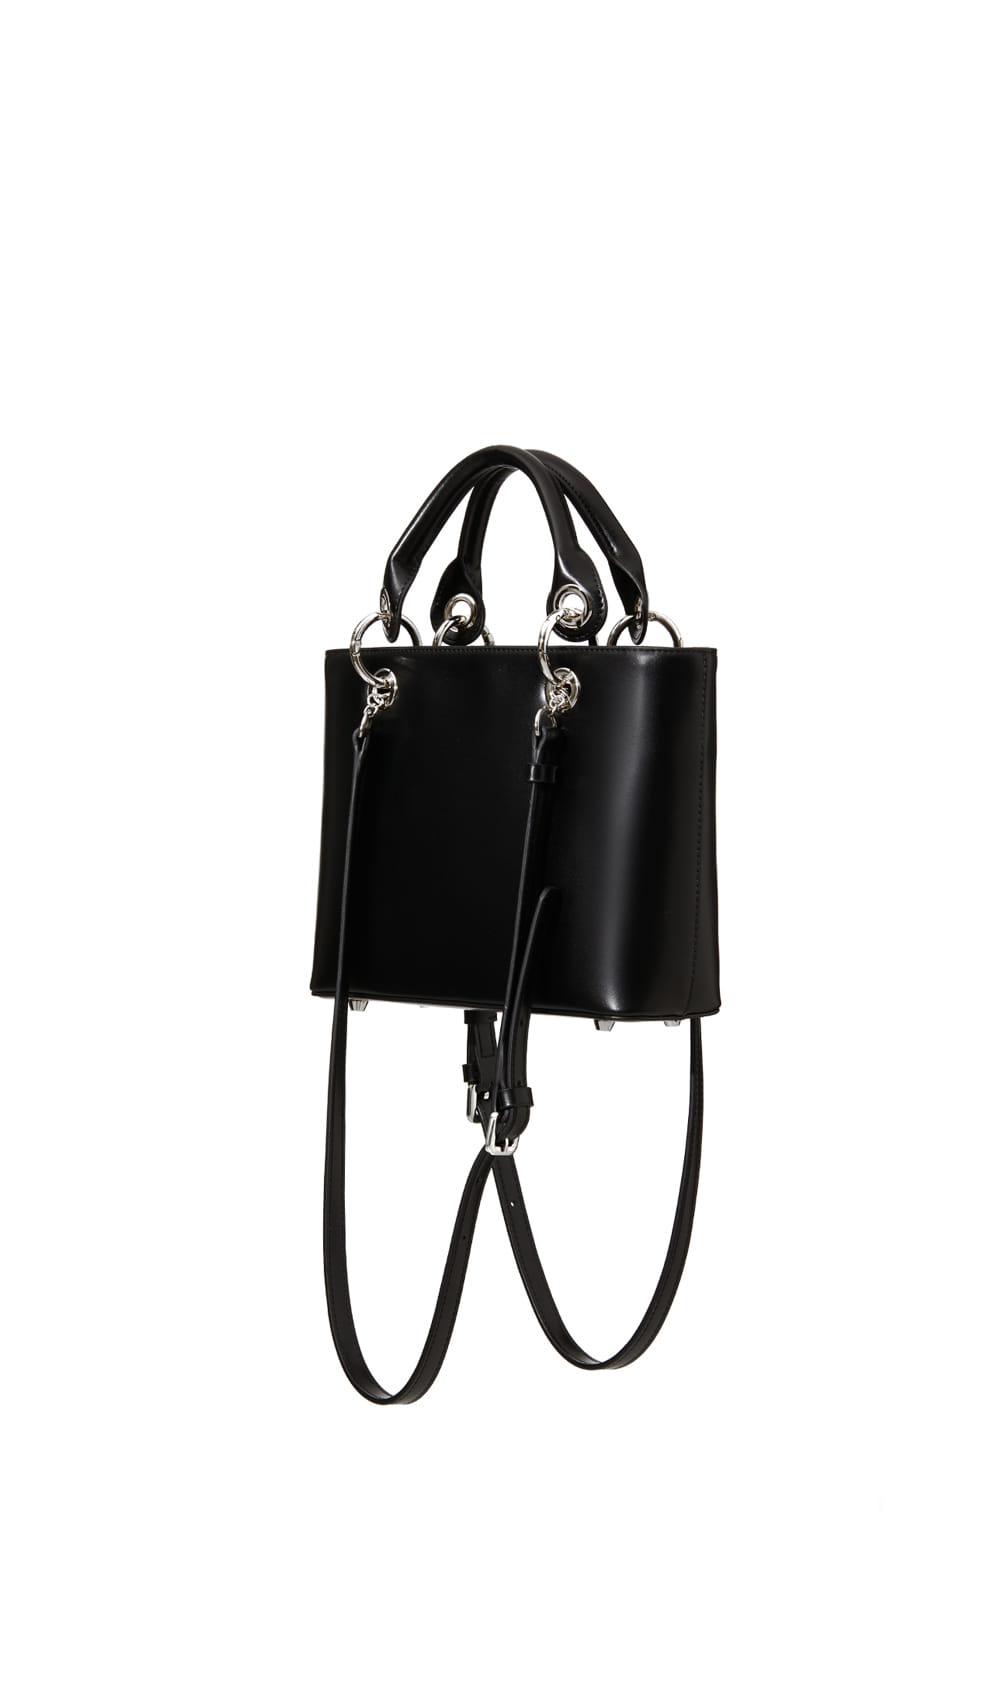 YOOUR Small Bag | Black | Leather |